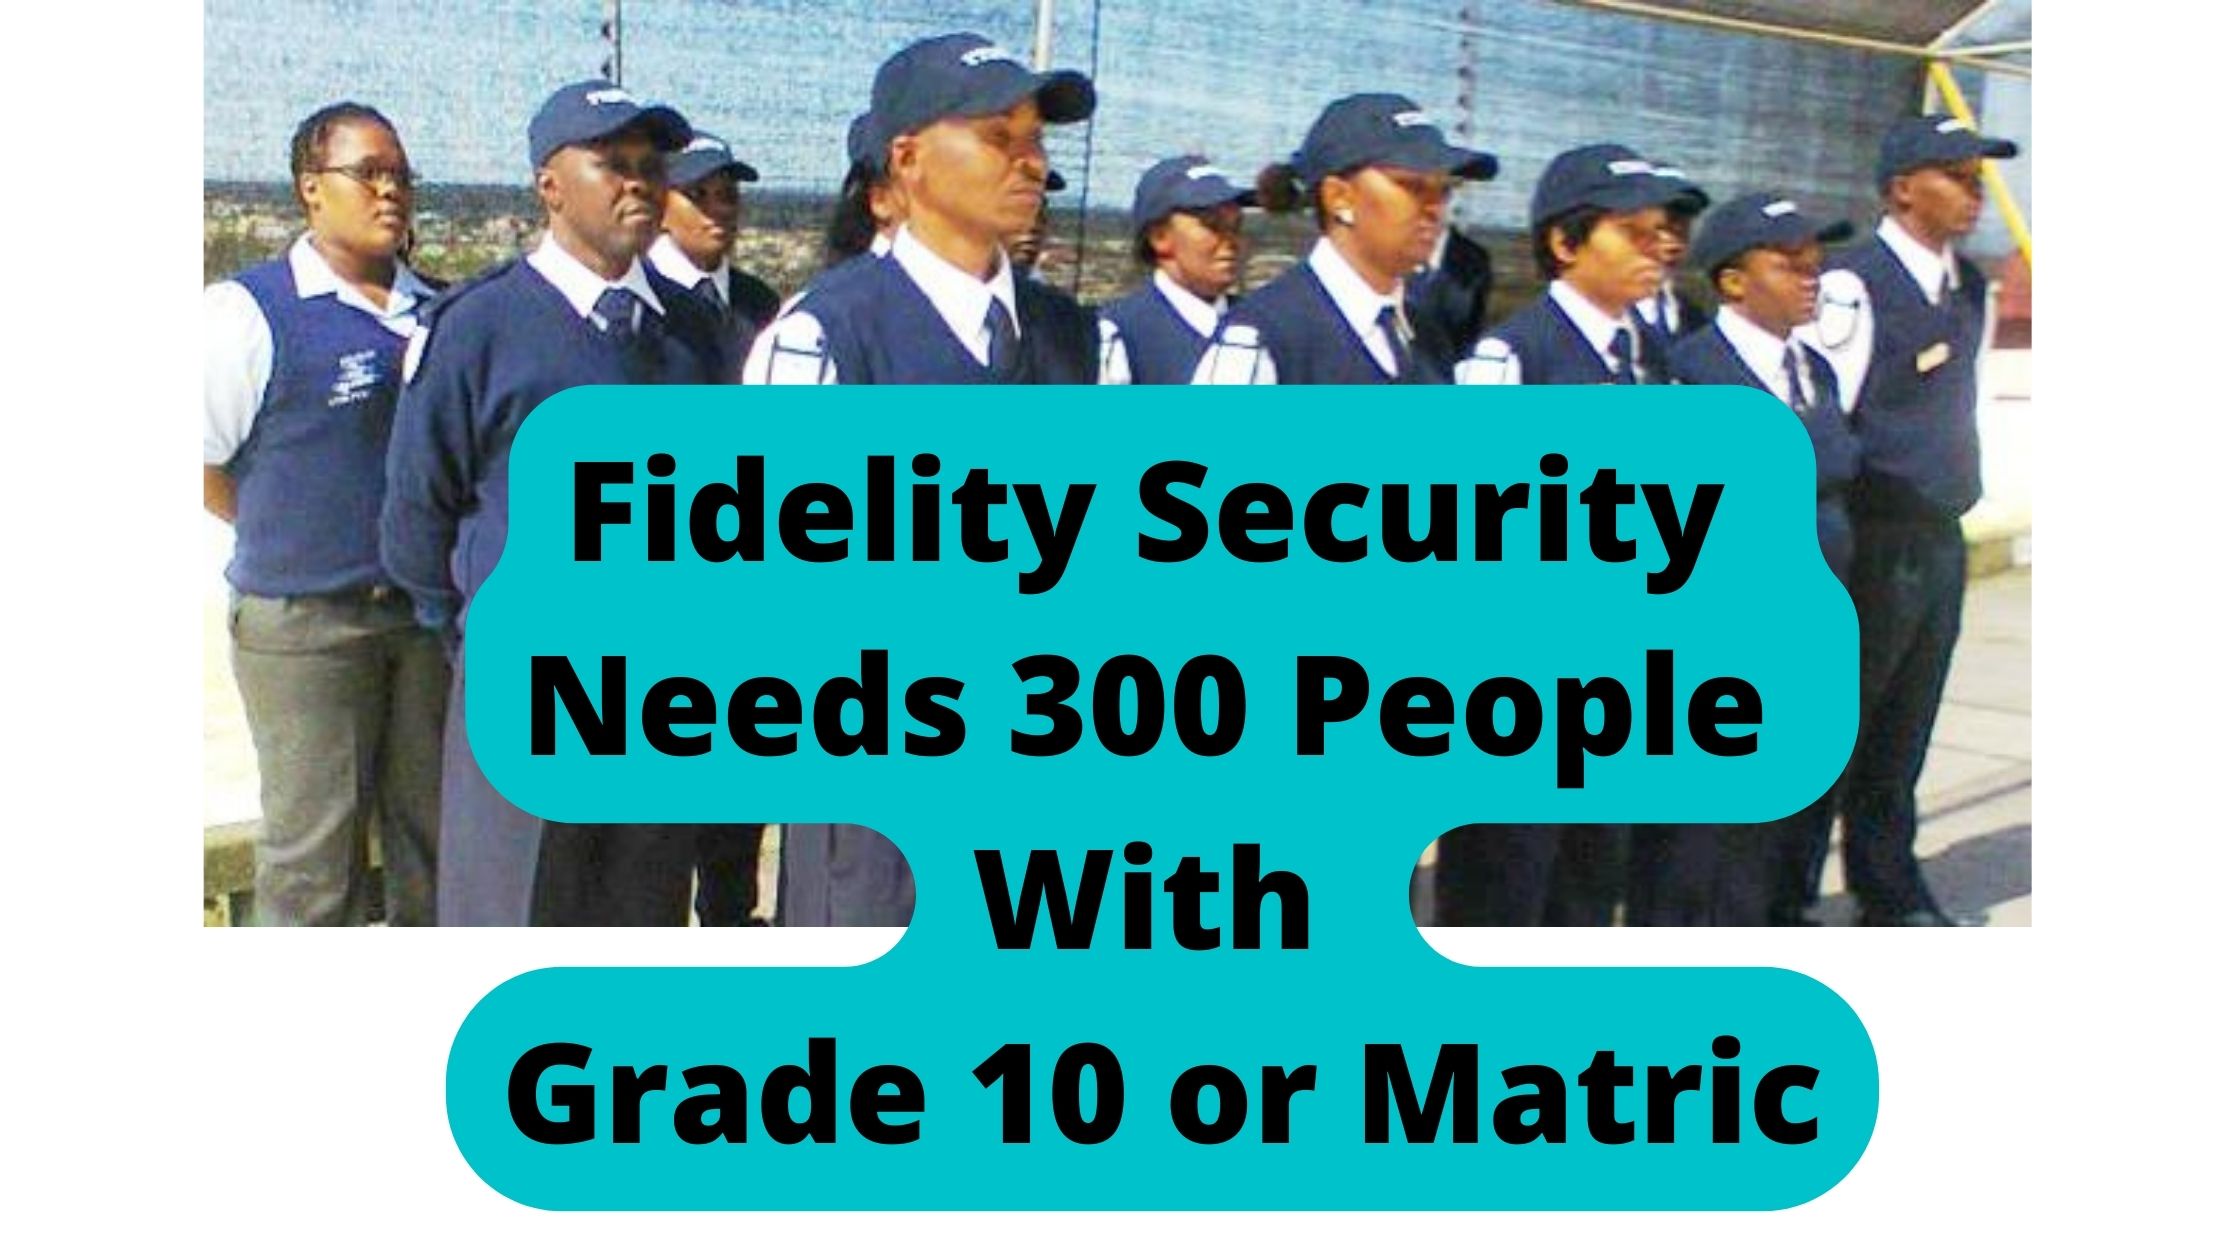 Fidelity Security Needs 300 People With Grade 10 or Matric